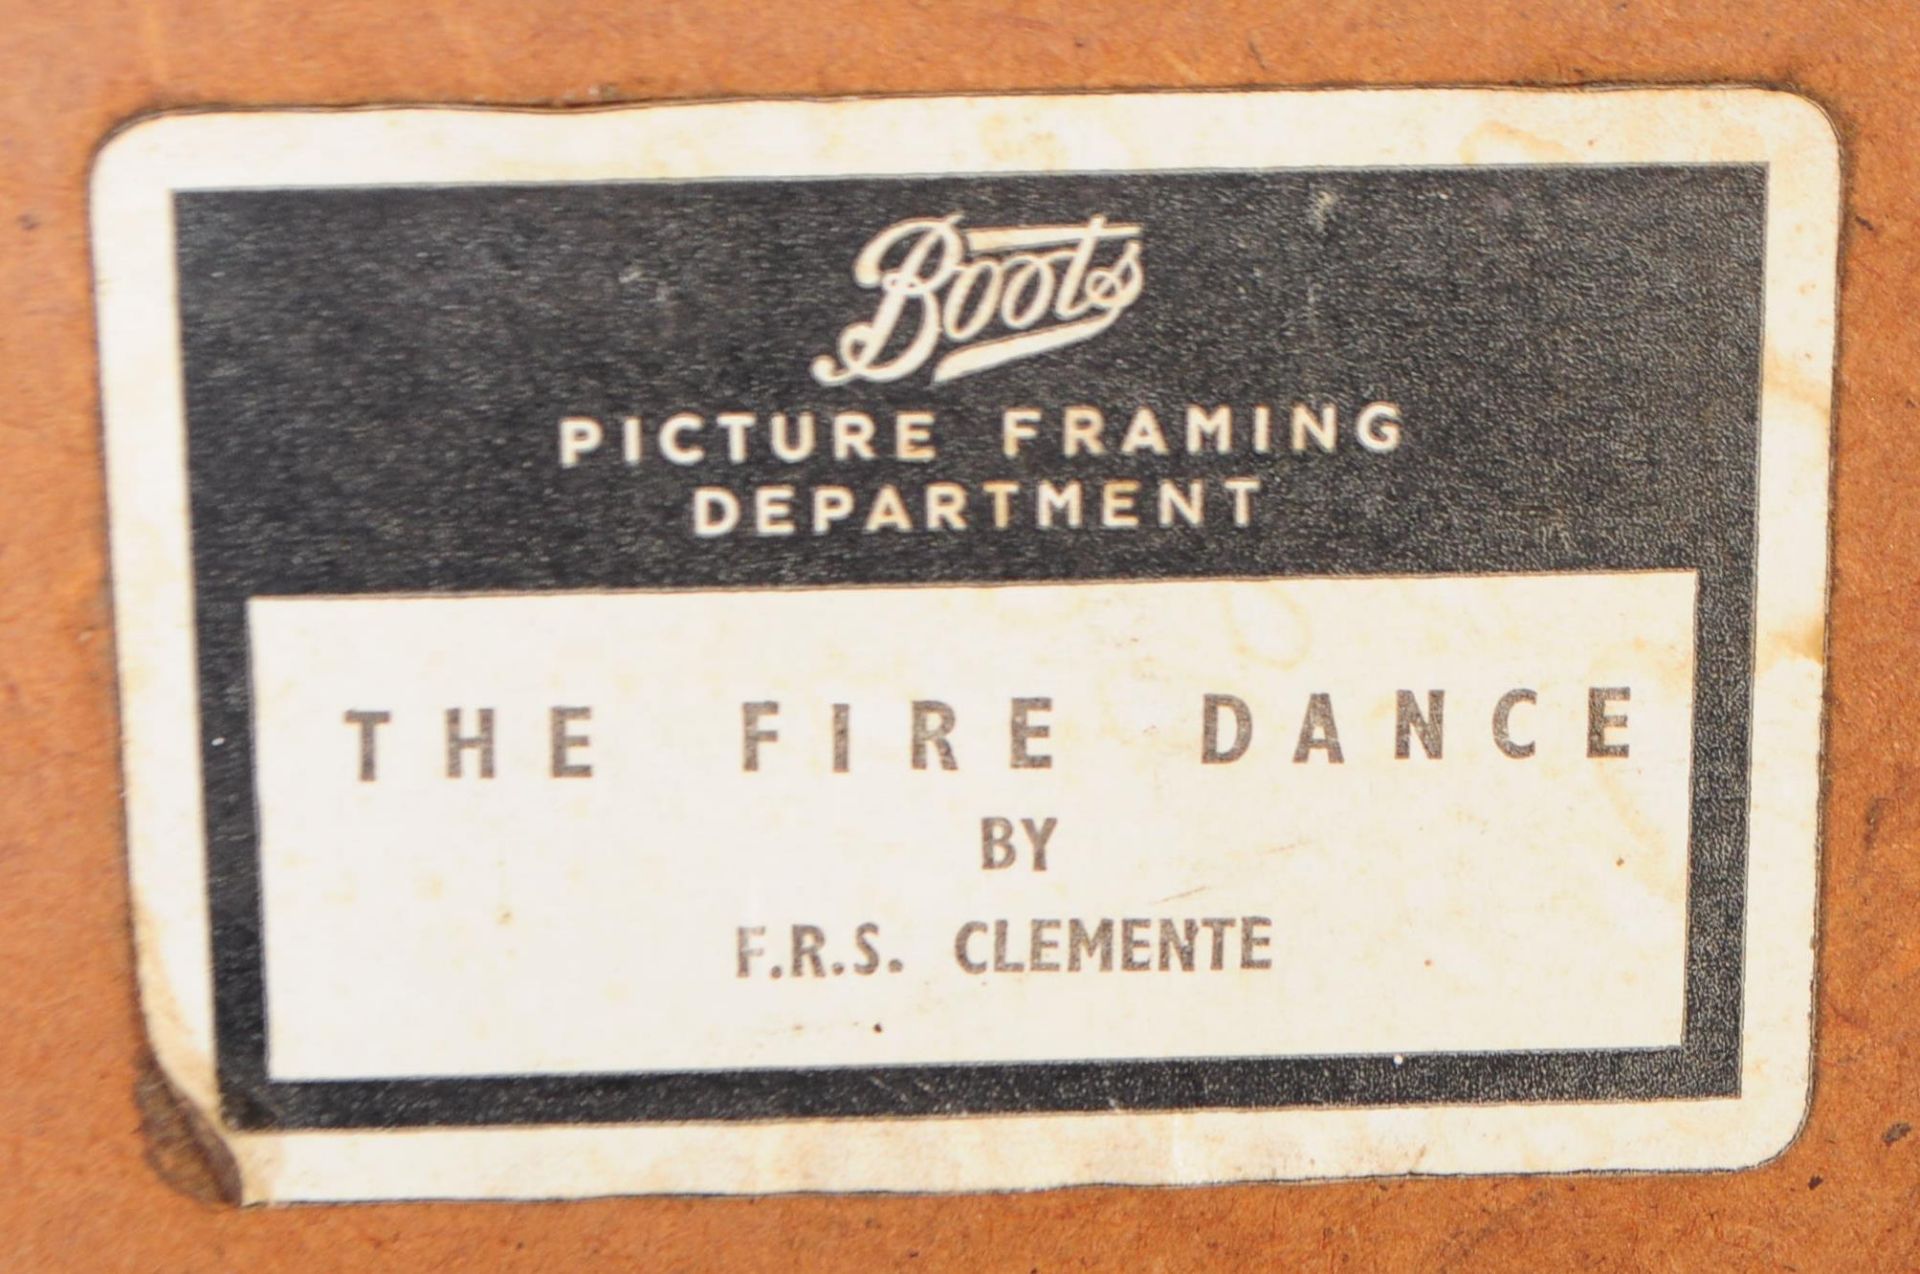 TWO RETRO CLEMENTE FRS PRINTS DEPICTING A DANCING WOMAN - Image 7 of 9